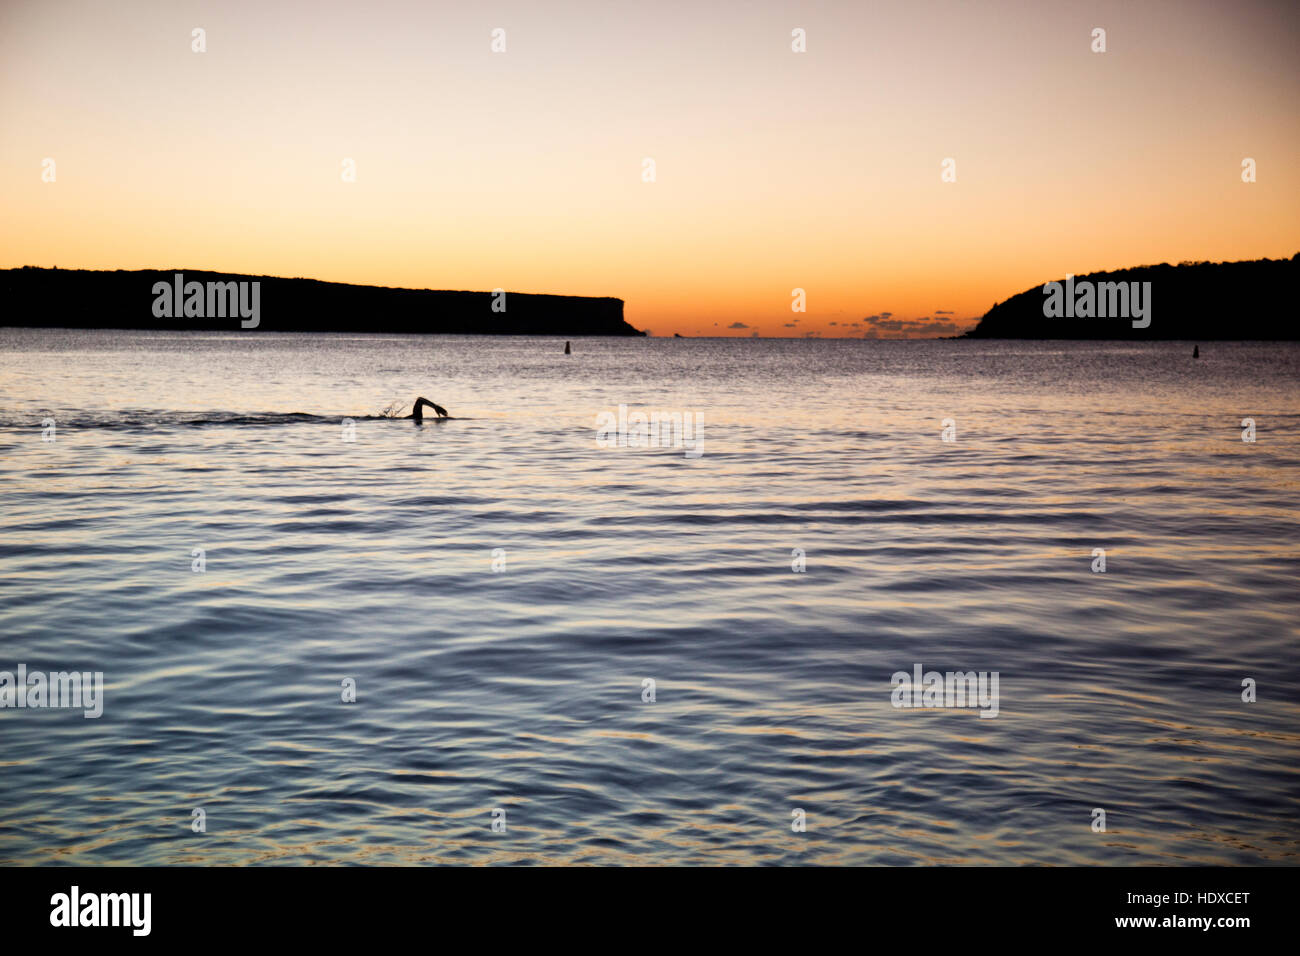 Arm of a swimmer comes out of the water mid-stroke swimming in the sea before sunrise Stock Photo